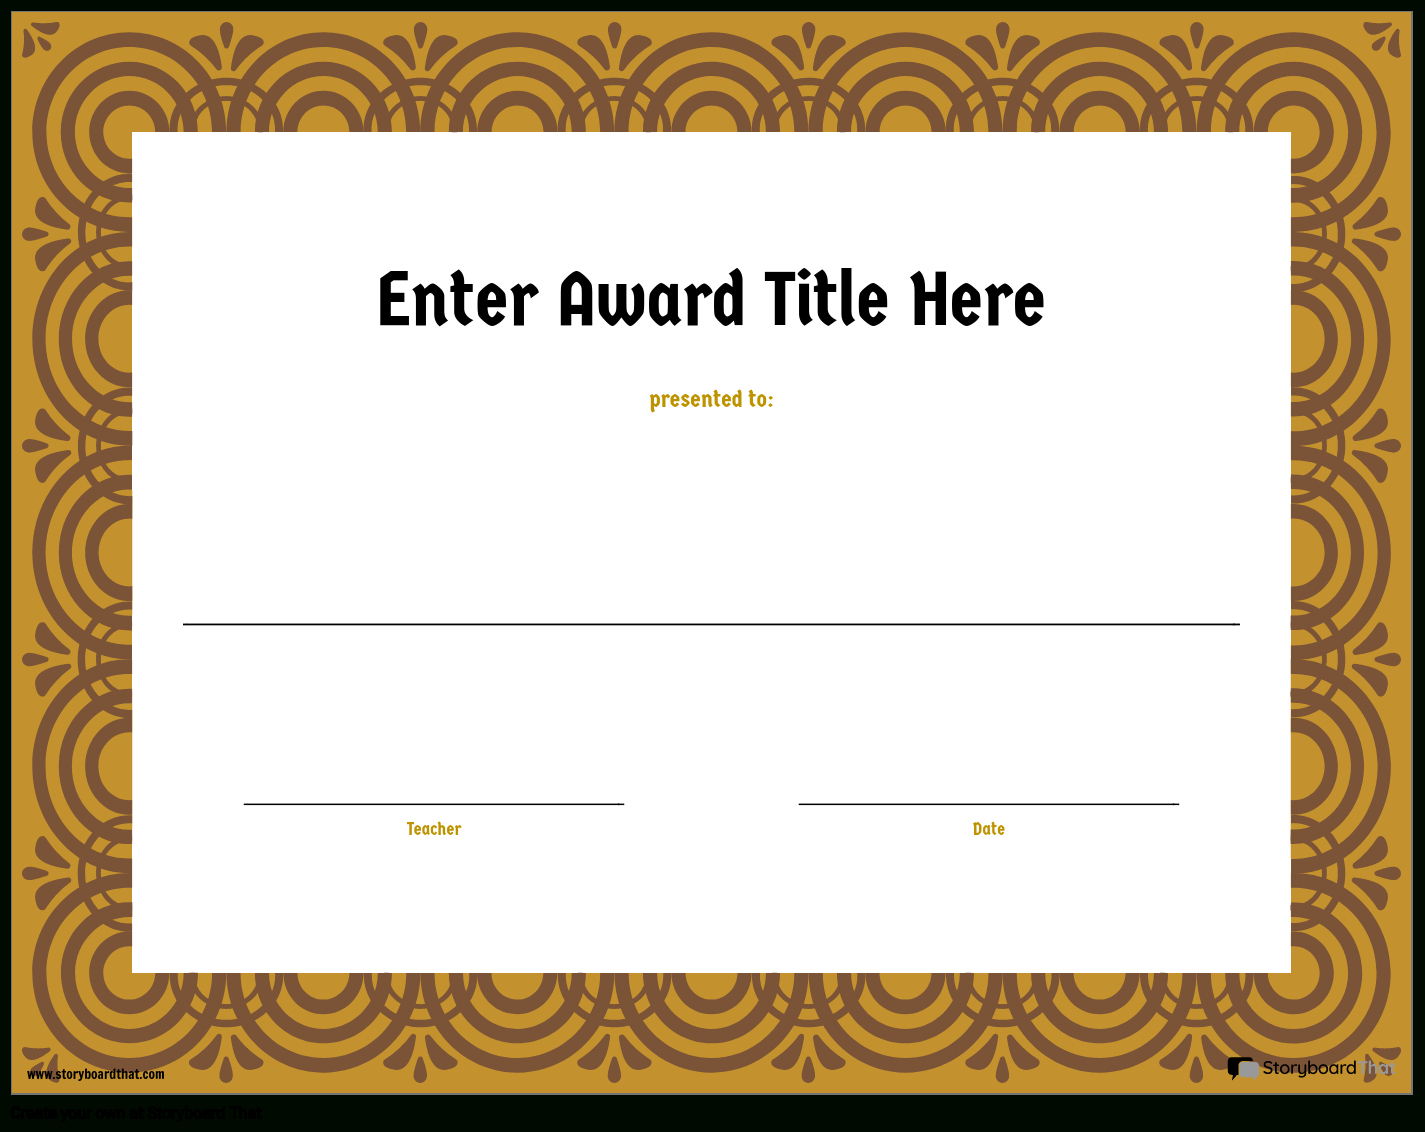 Free Printable Student Certificate And Award Templates - Free Printable Award Certificate Borders